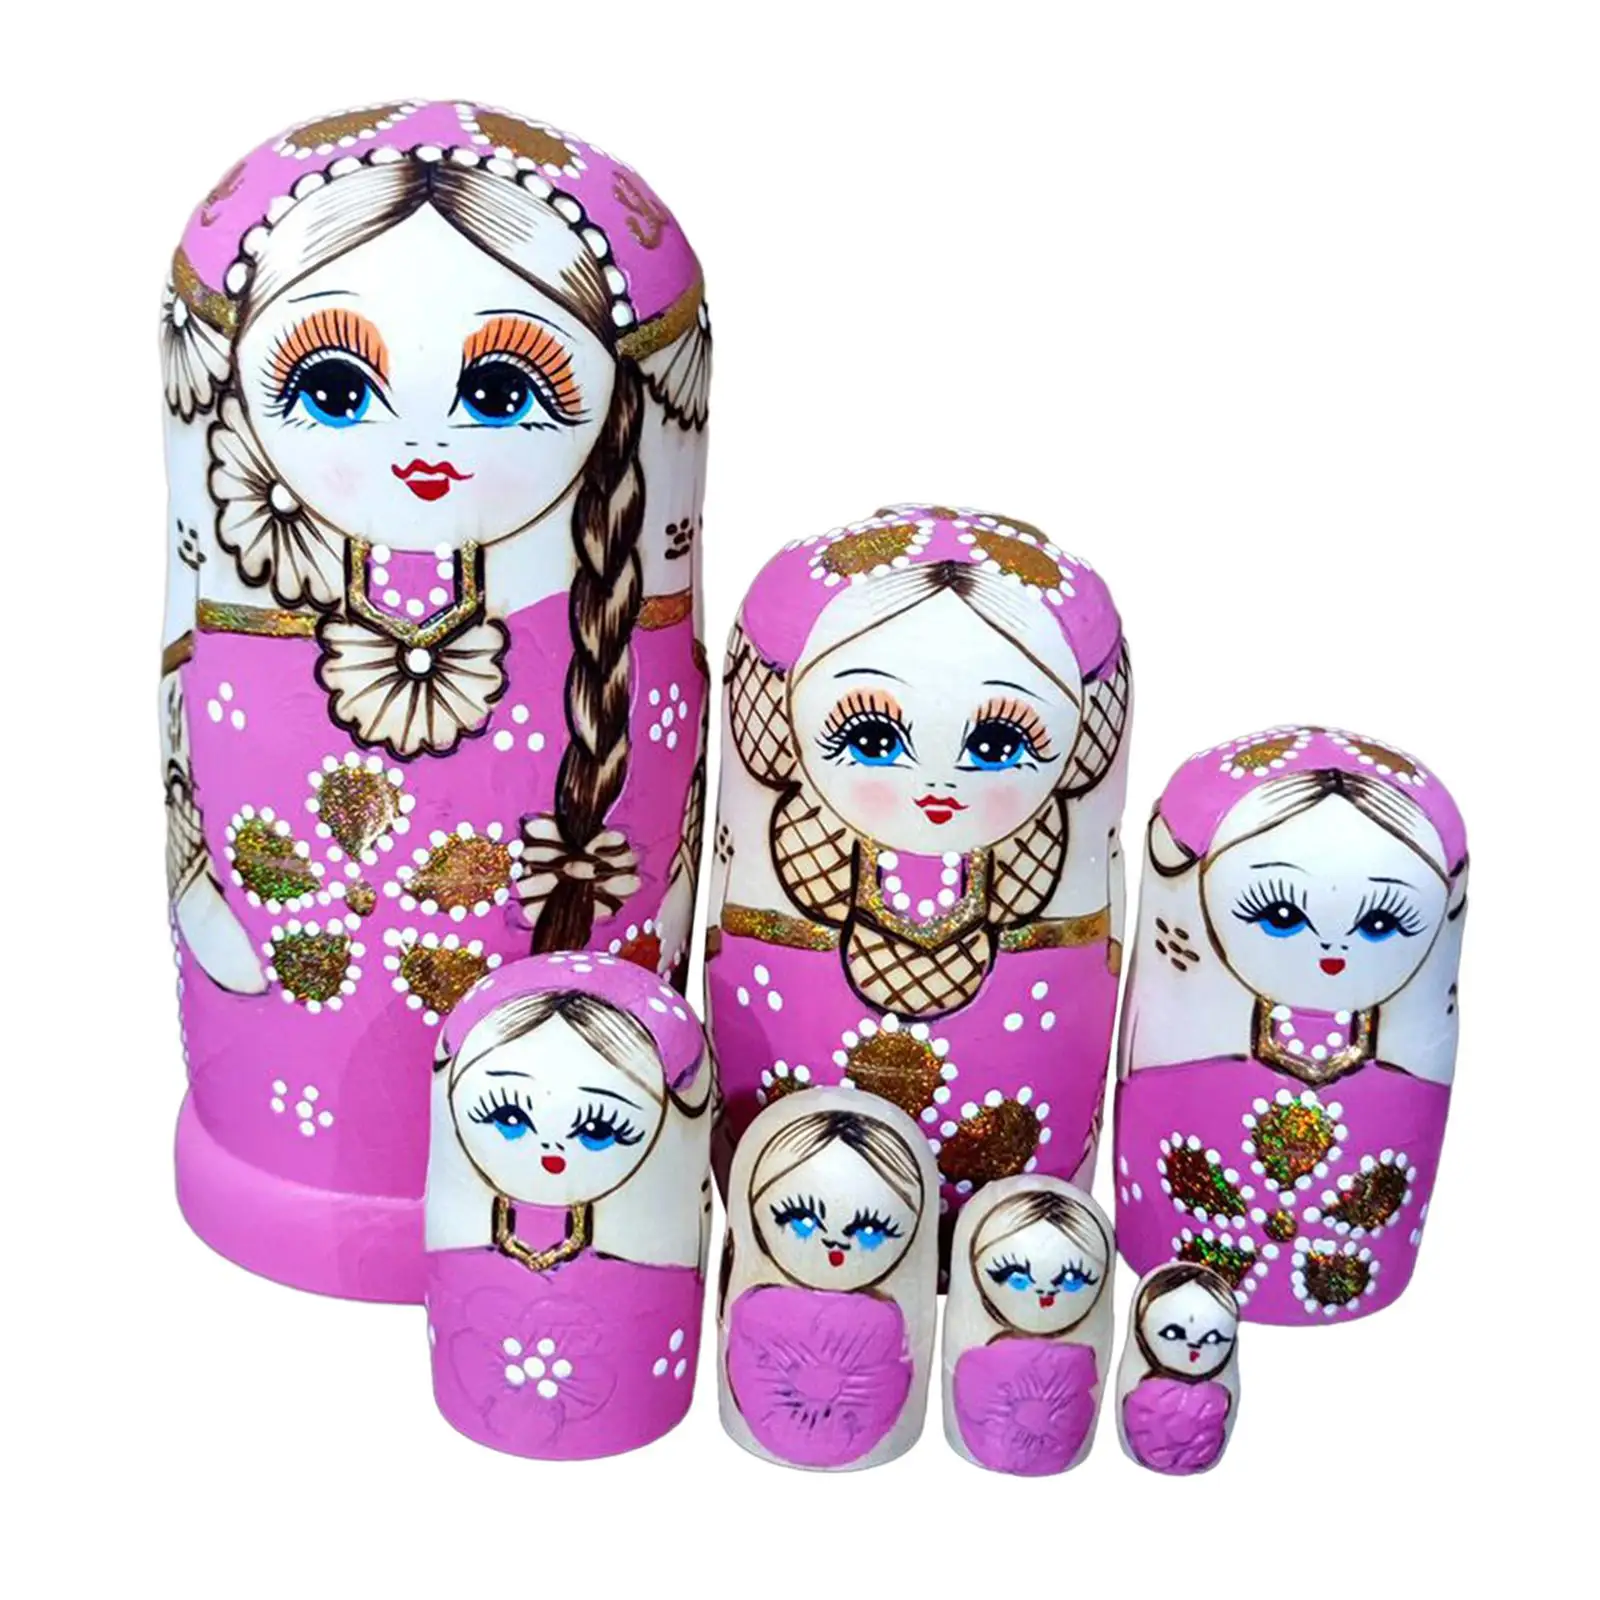 7Pcs Russian Nesting Dolls Cute Holiday Collectible Handpainted Decoration